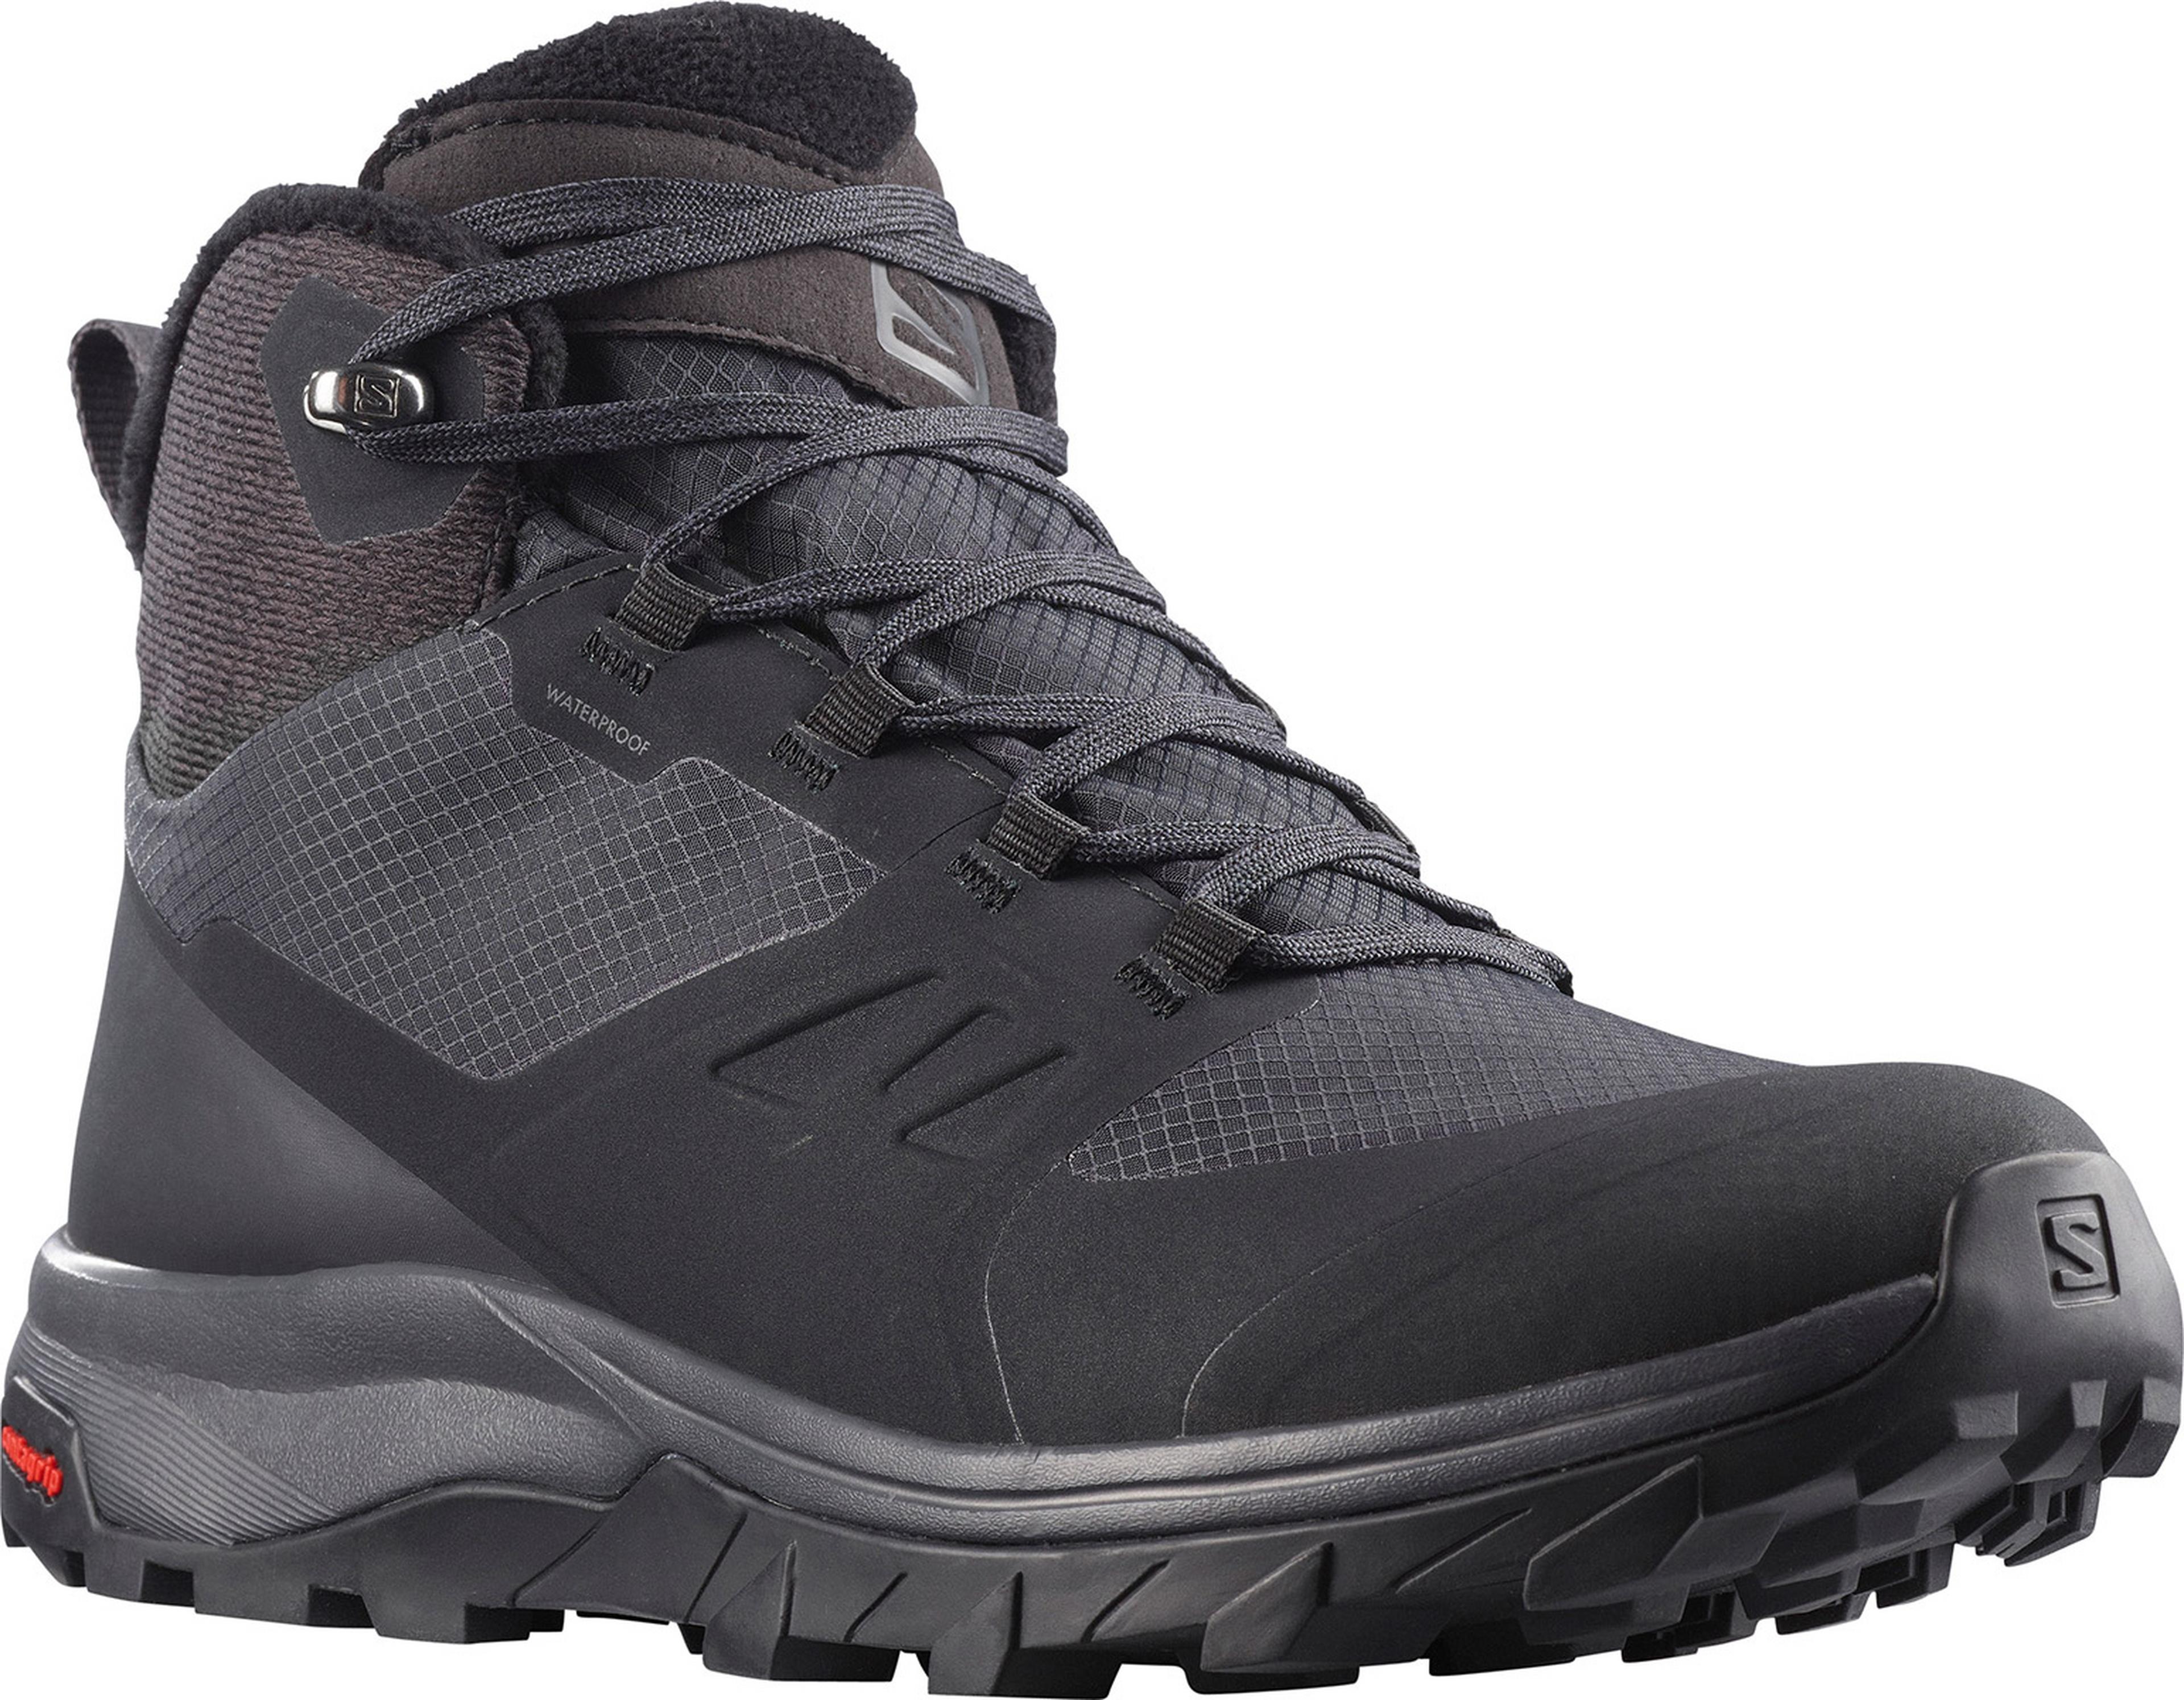 Salomon Women's OUTsnap CSWP Hiking Boots | Wiggle